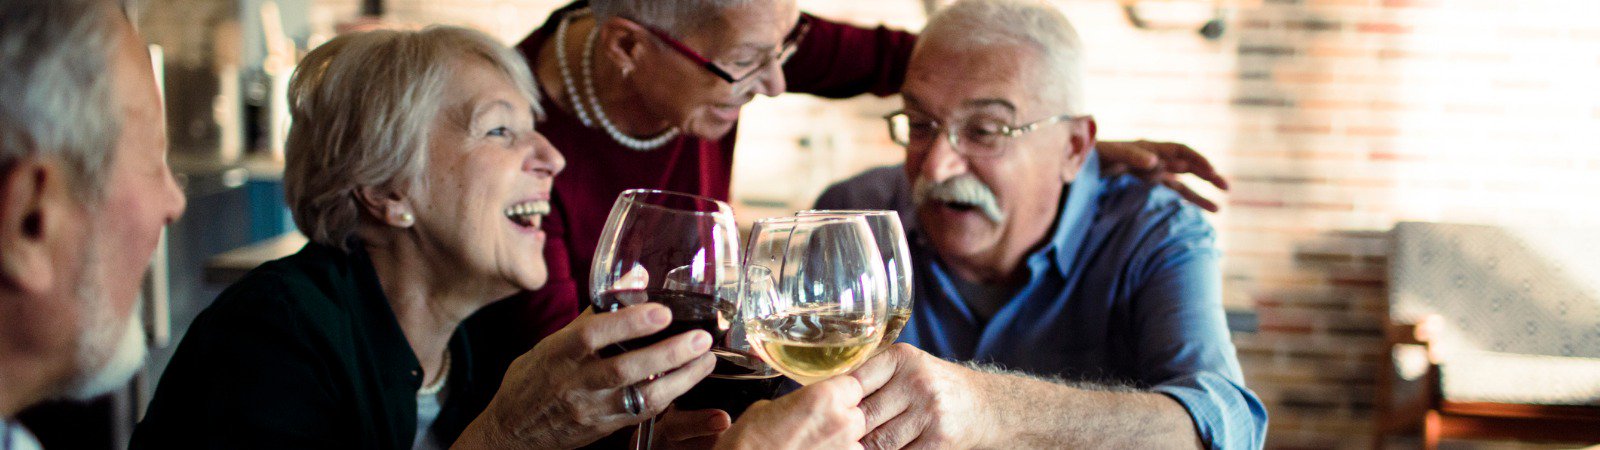 group of older people raising wine glasses at restaurant table